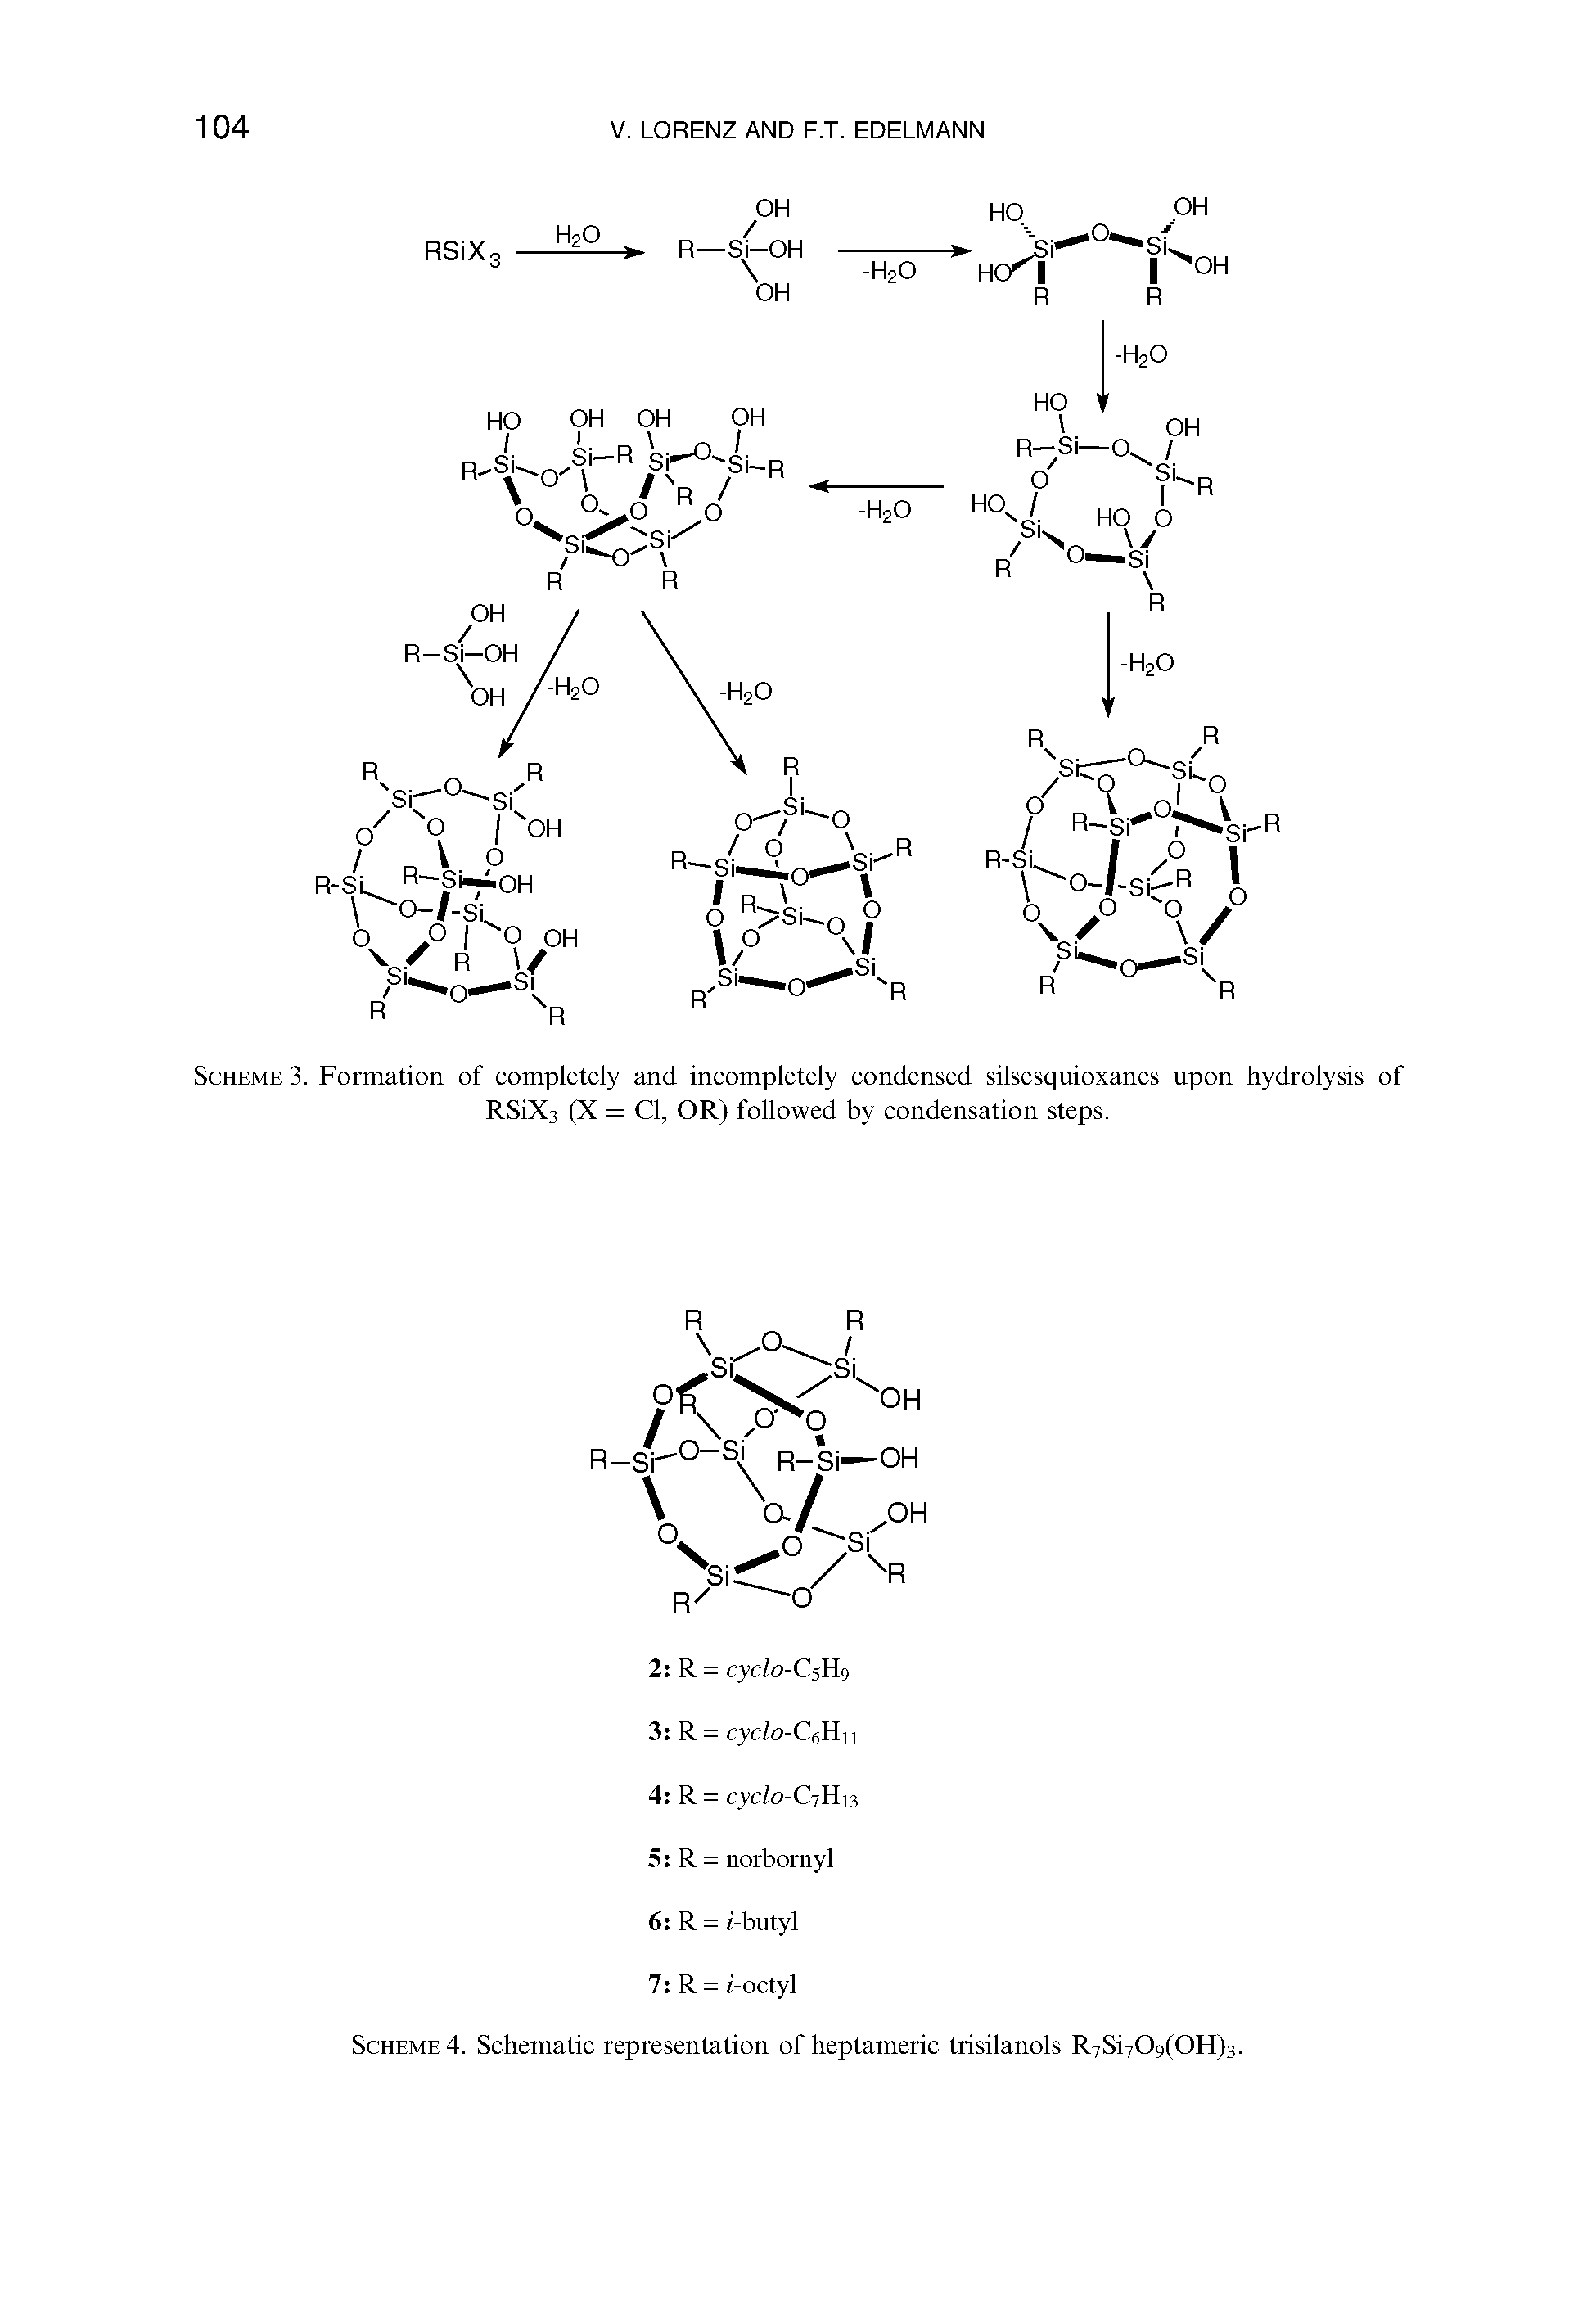 Scheme 3. Formation of completely and incompletely condensed silsesquioxanes upon hydrolysis of RSiXs pc = Cl, OR) followed by condensation steps.